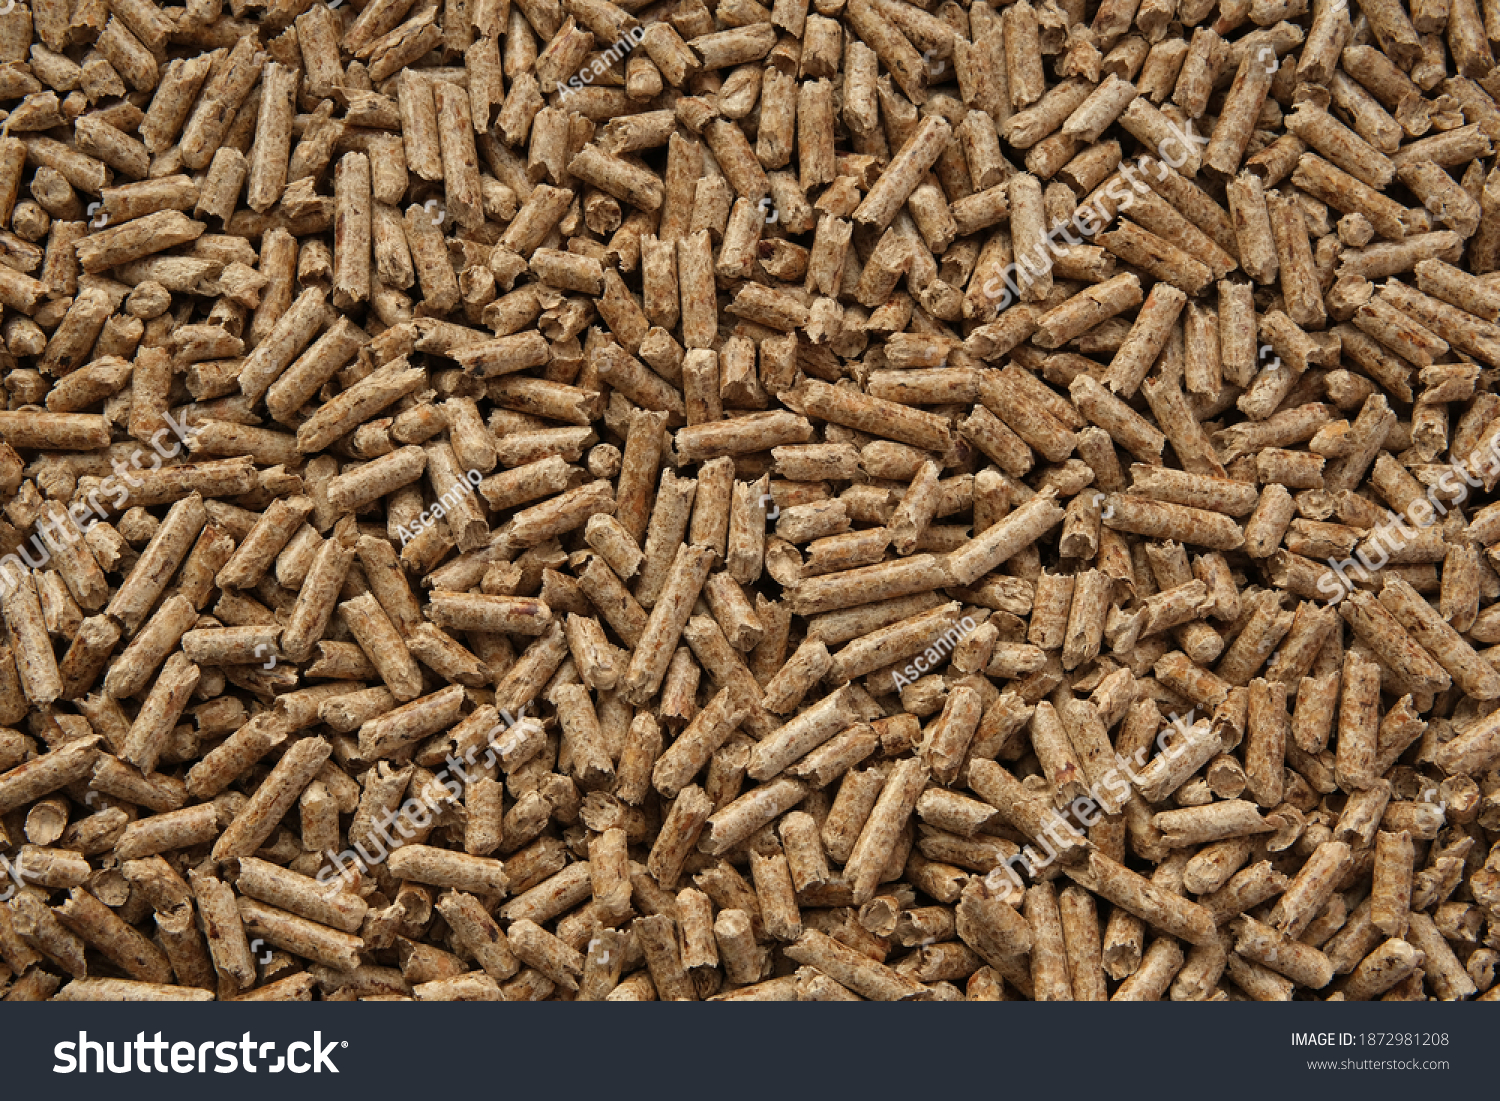 Wood pellets texture. Pellets made from compressed wood and used as natural cat litter. Eco-friendly and biodegradable material. Flat lay image. #1872981208